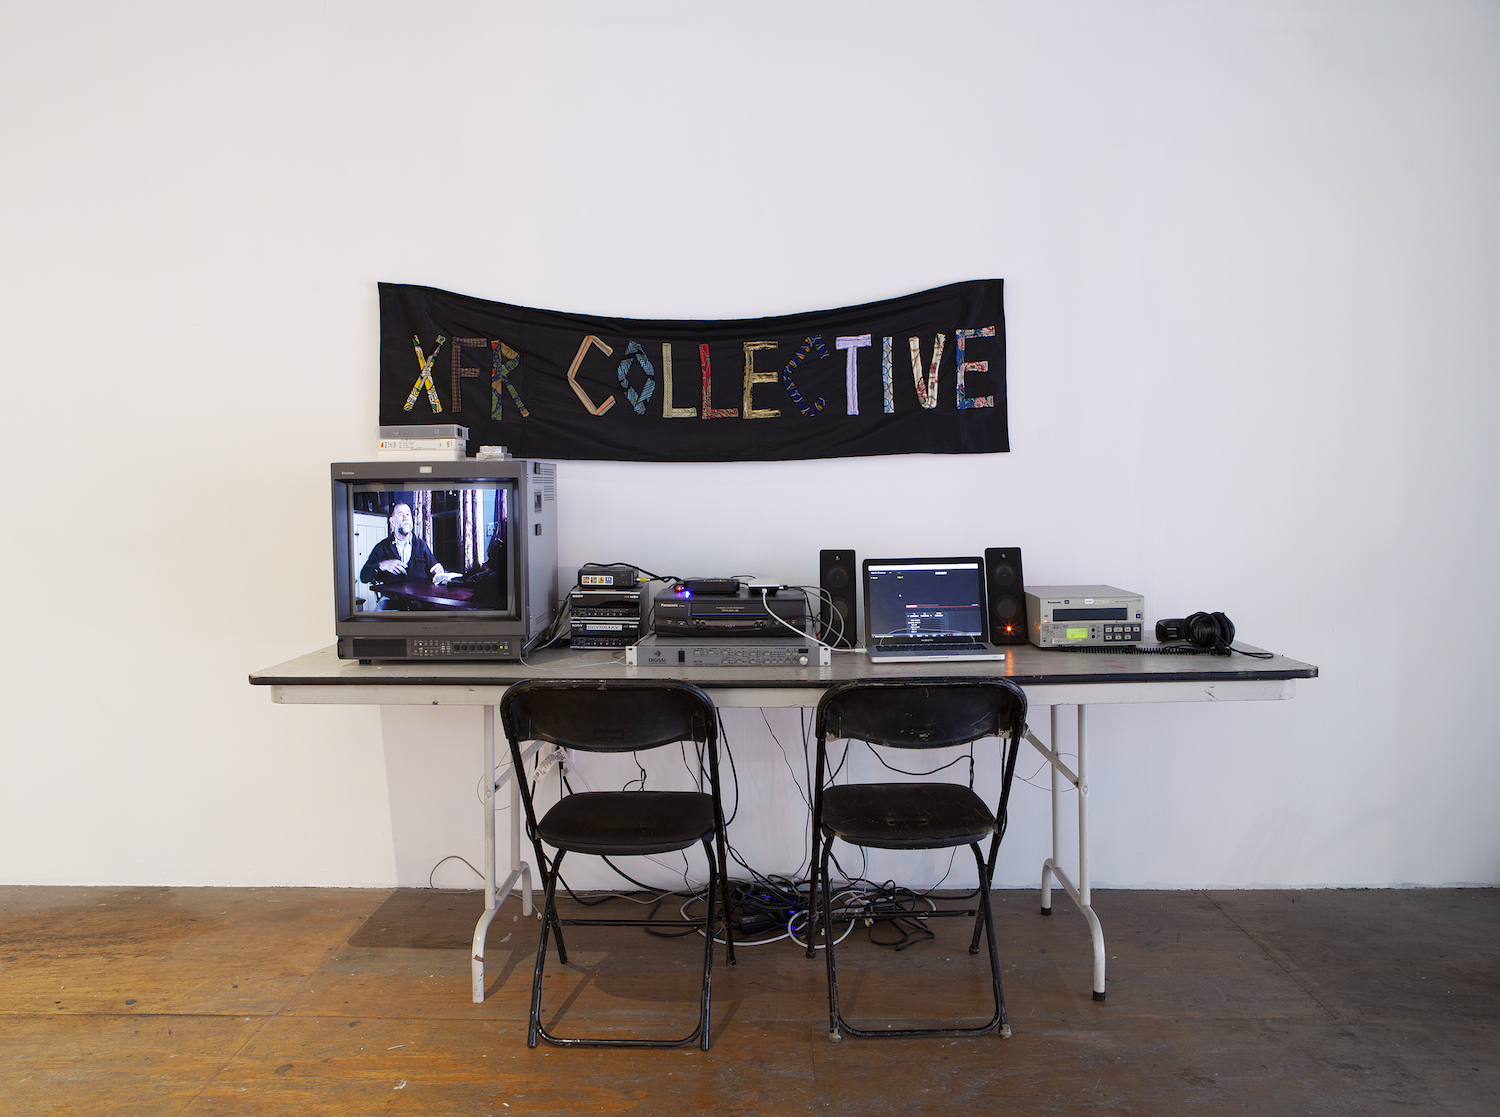 XFR Collective, *Video Transfer Station*, 2019. Video playback decks, time base corrector, monitor, analog-to-digital converter